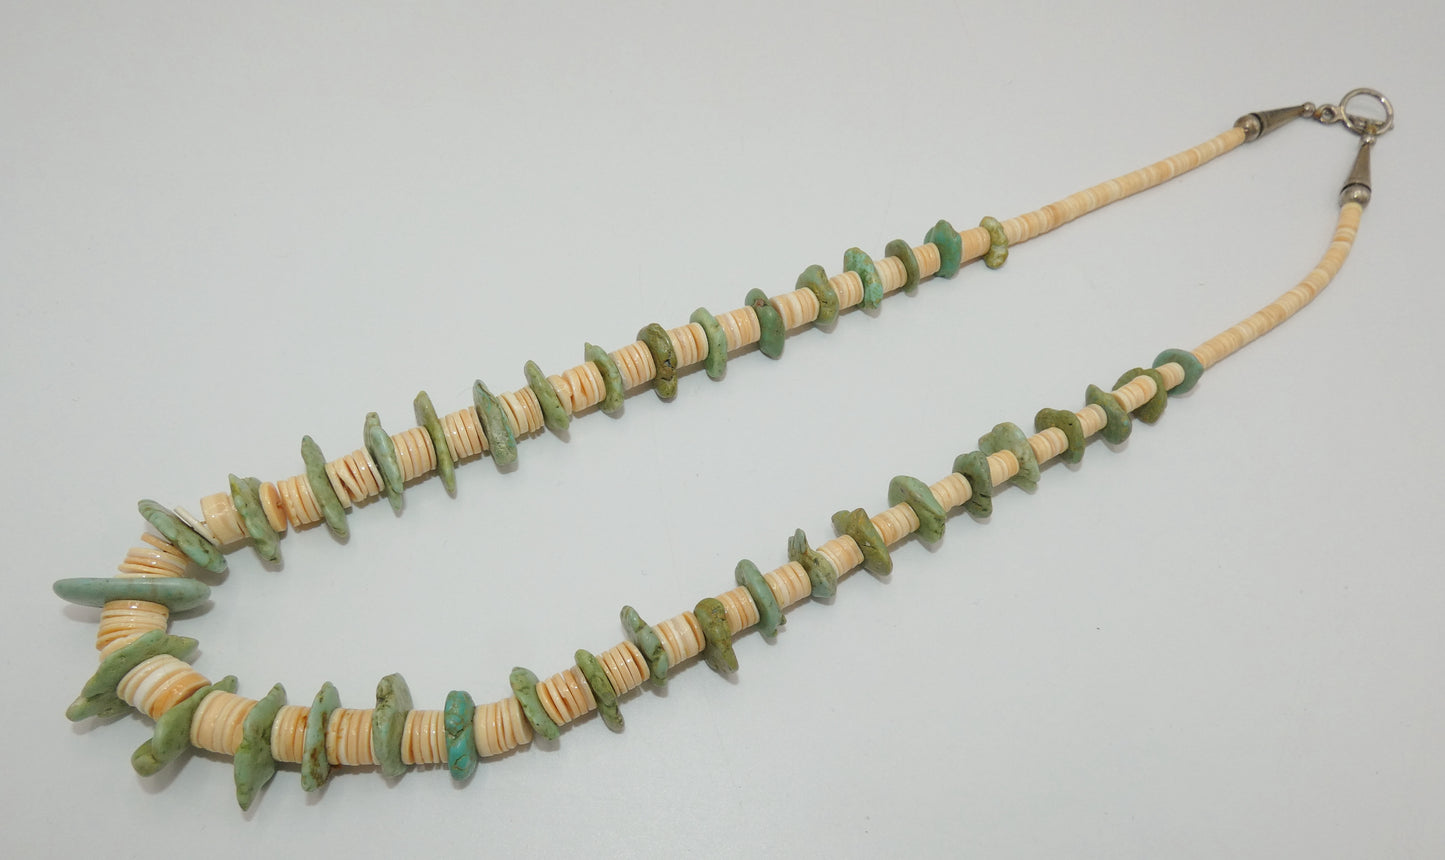 Green Turquoise & Shell Tab Necklace